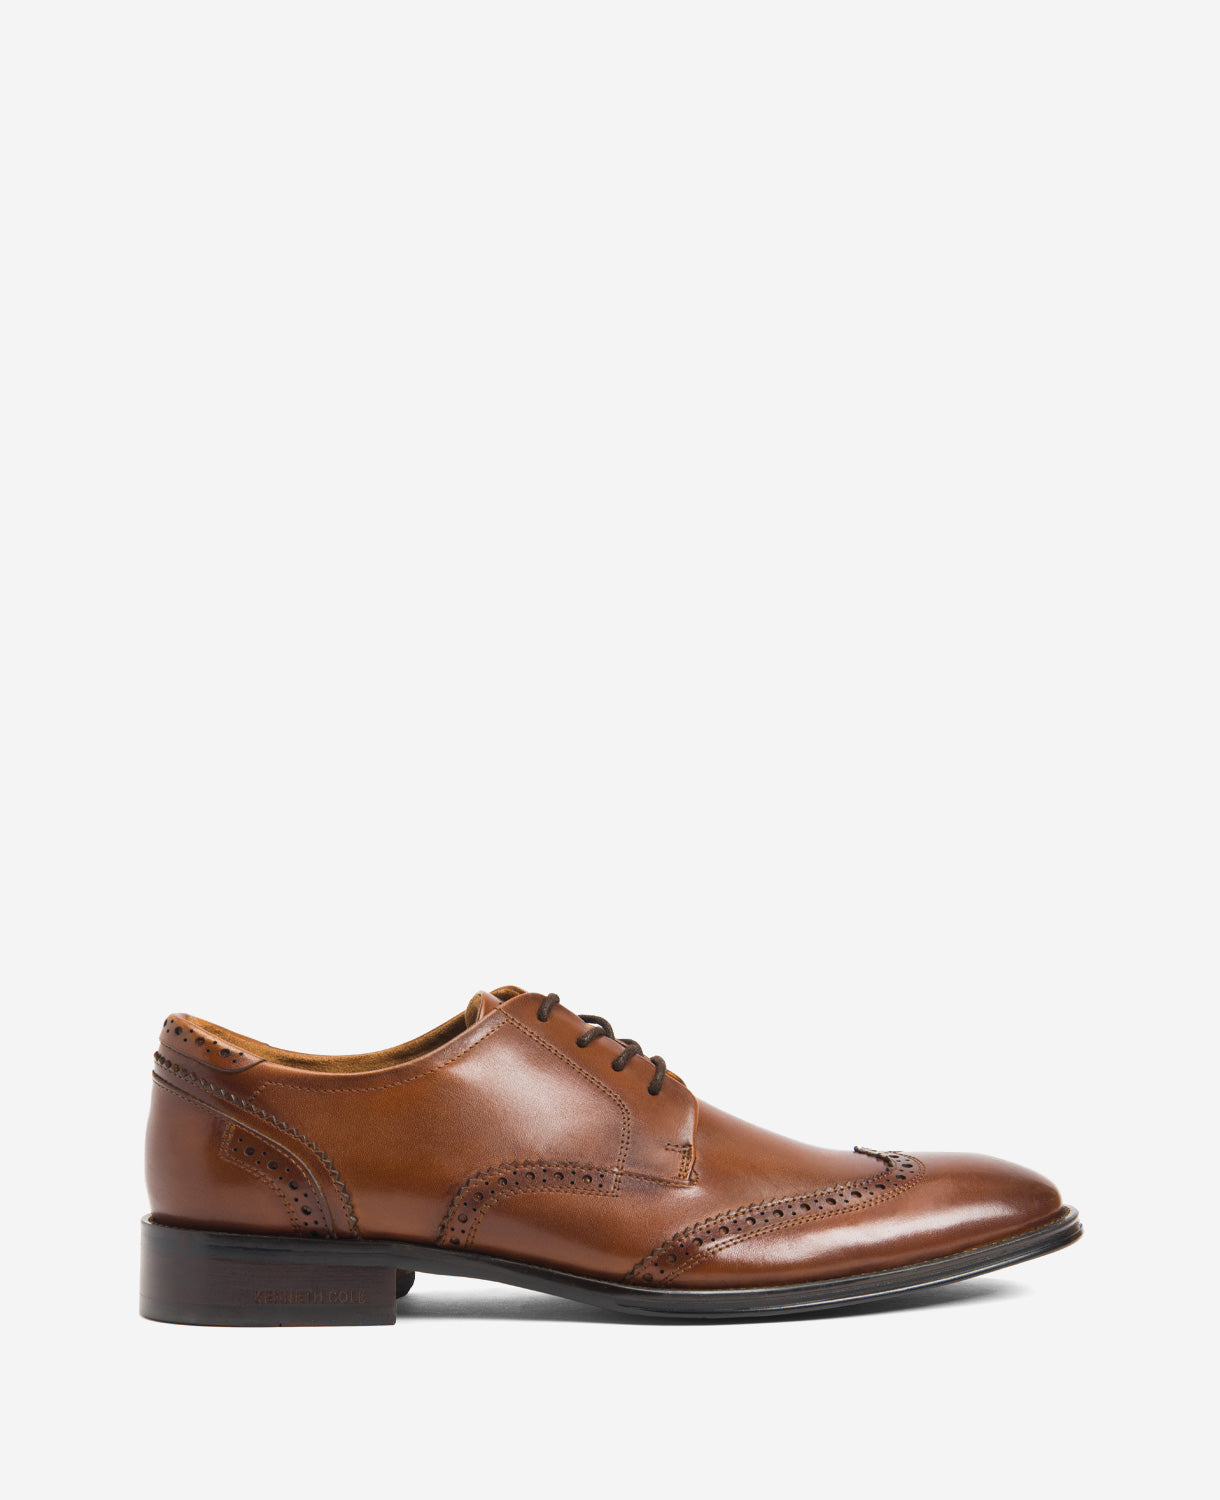 Kenneth Cole Tully Brogue Lace-up Oxford Shoe In Cognac